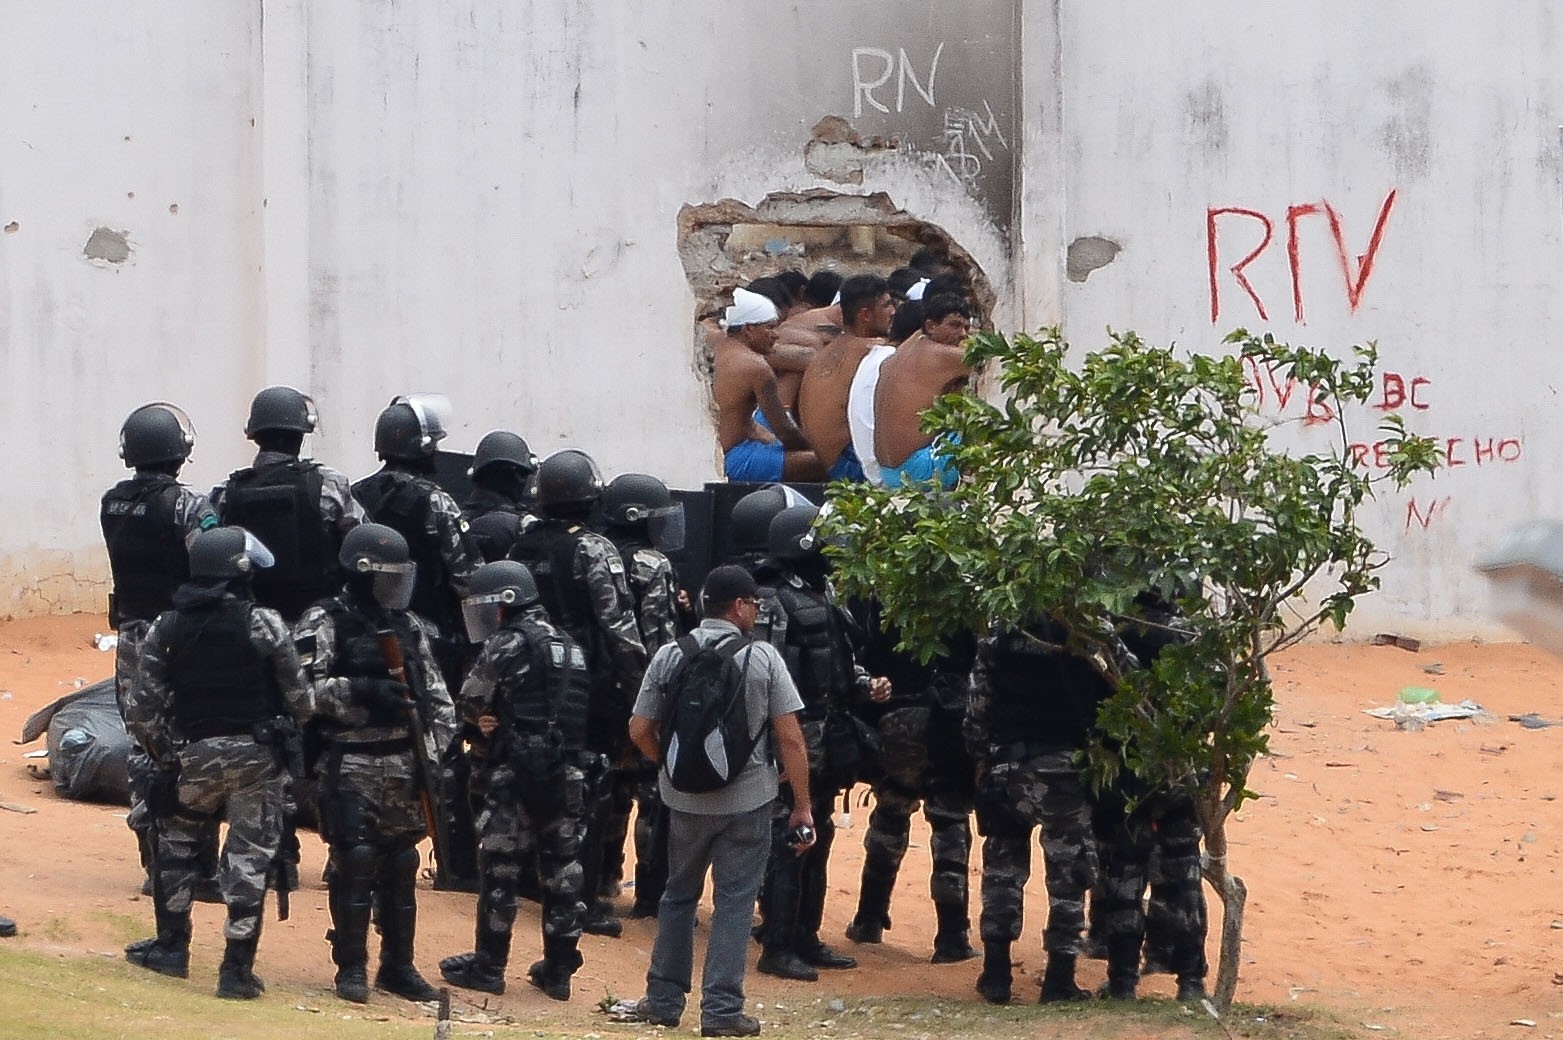 Riot police enter the Alcacuz Penitentiary Center near Natal to regain control after a gang confrontation at the prison in Rio Grande do Norte, Brazil on January 21, 2017.  (AFP Photo)